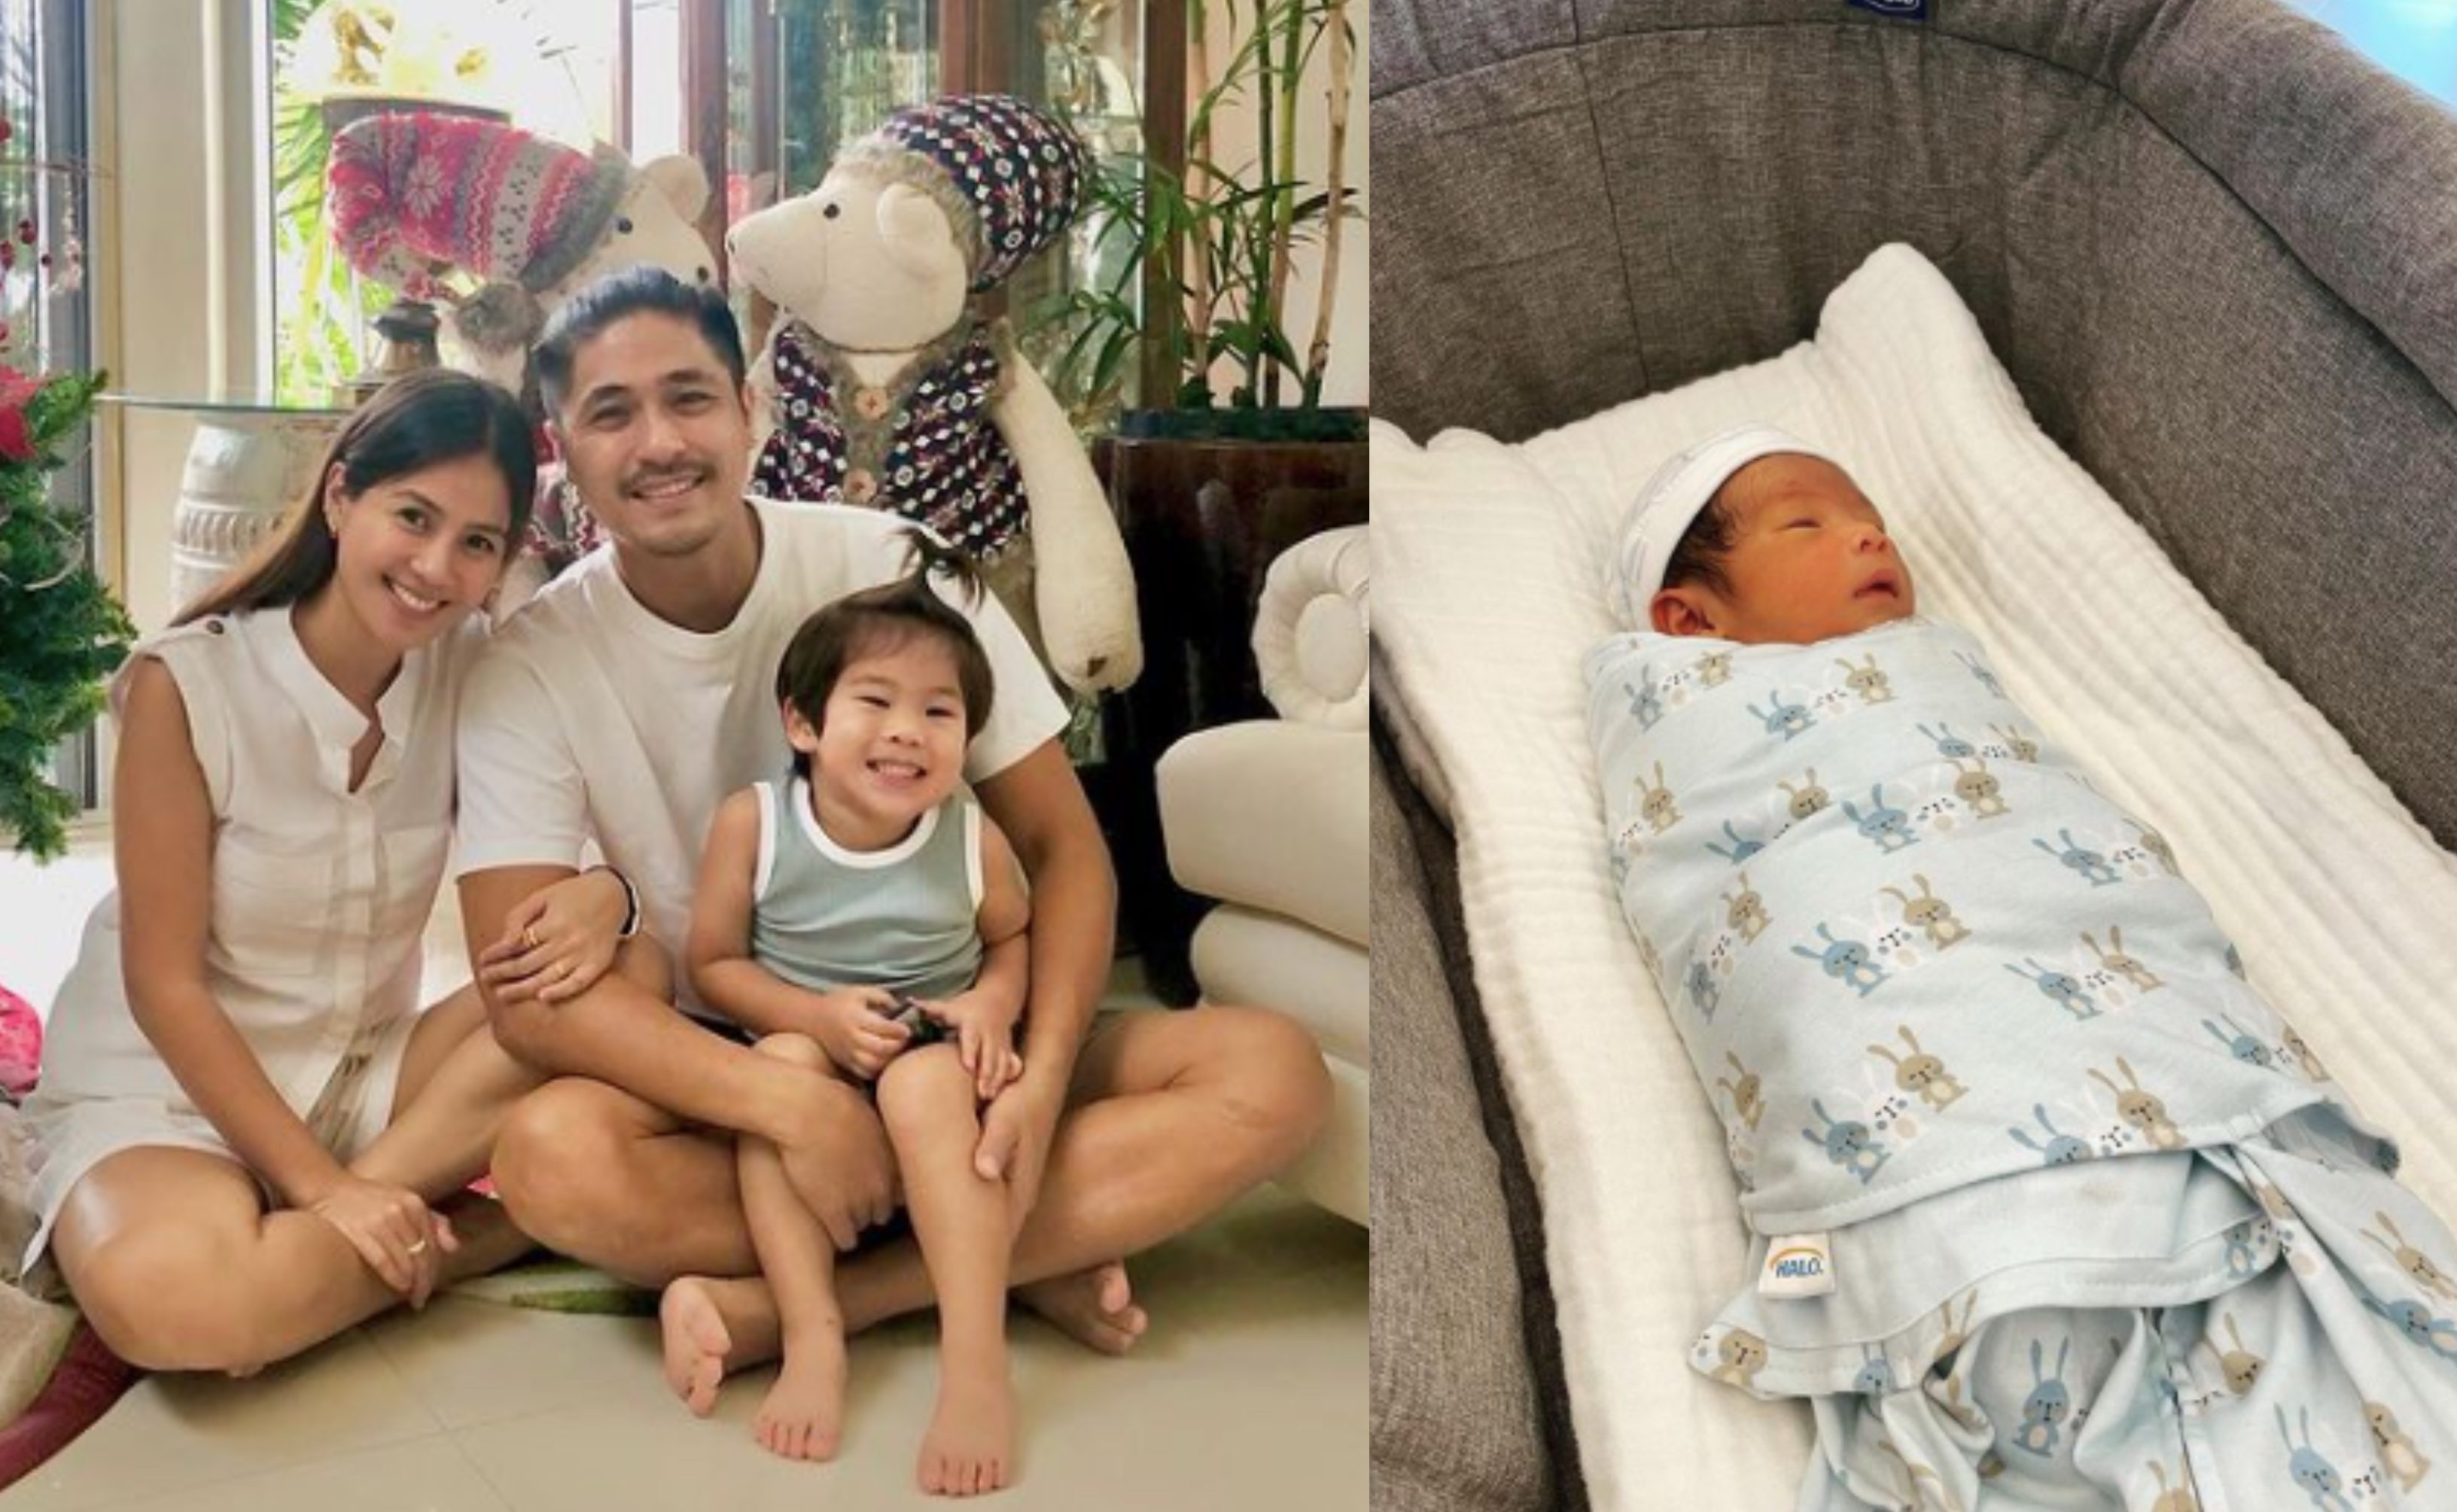 Kaye Abad, Paul Jake Castillo welcome second child